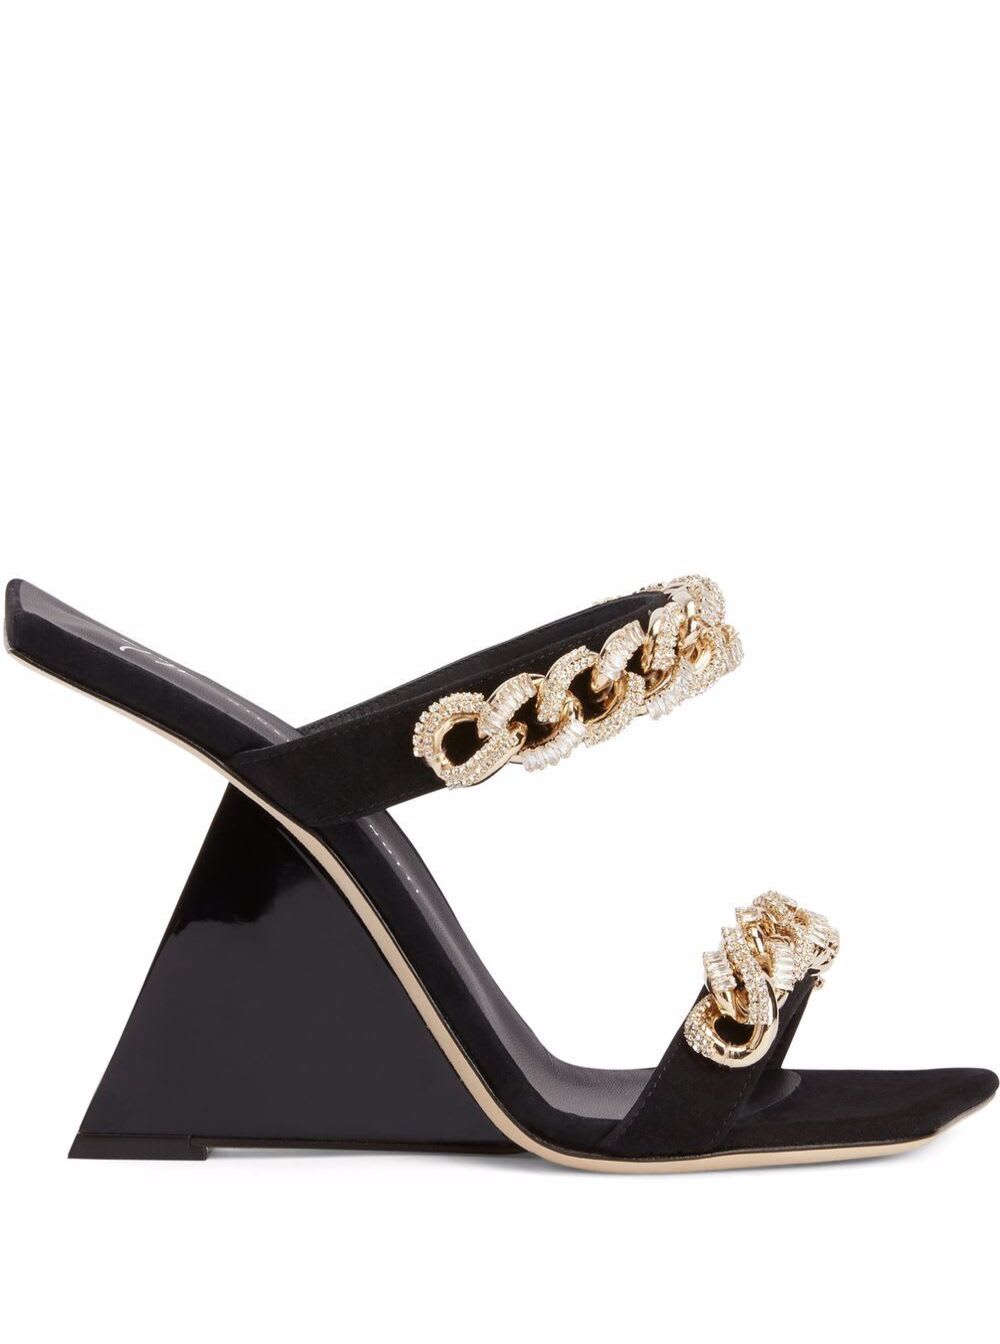 Giuseppe Zanotti Suede Sandals With Chain Details